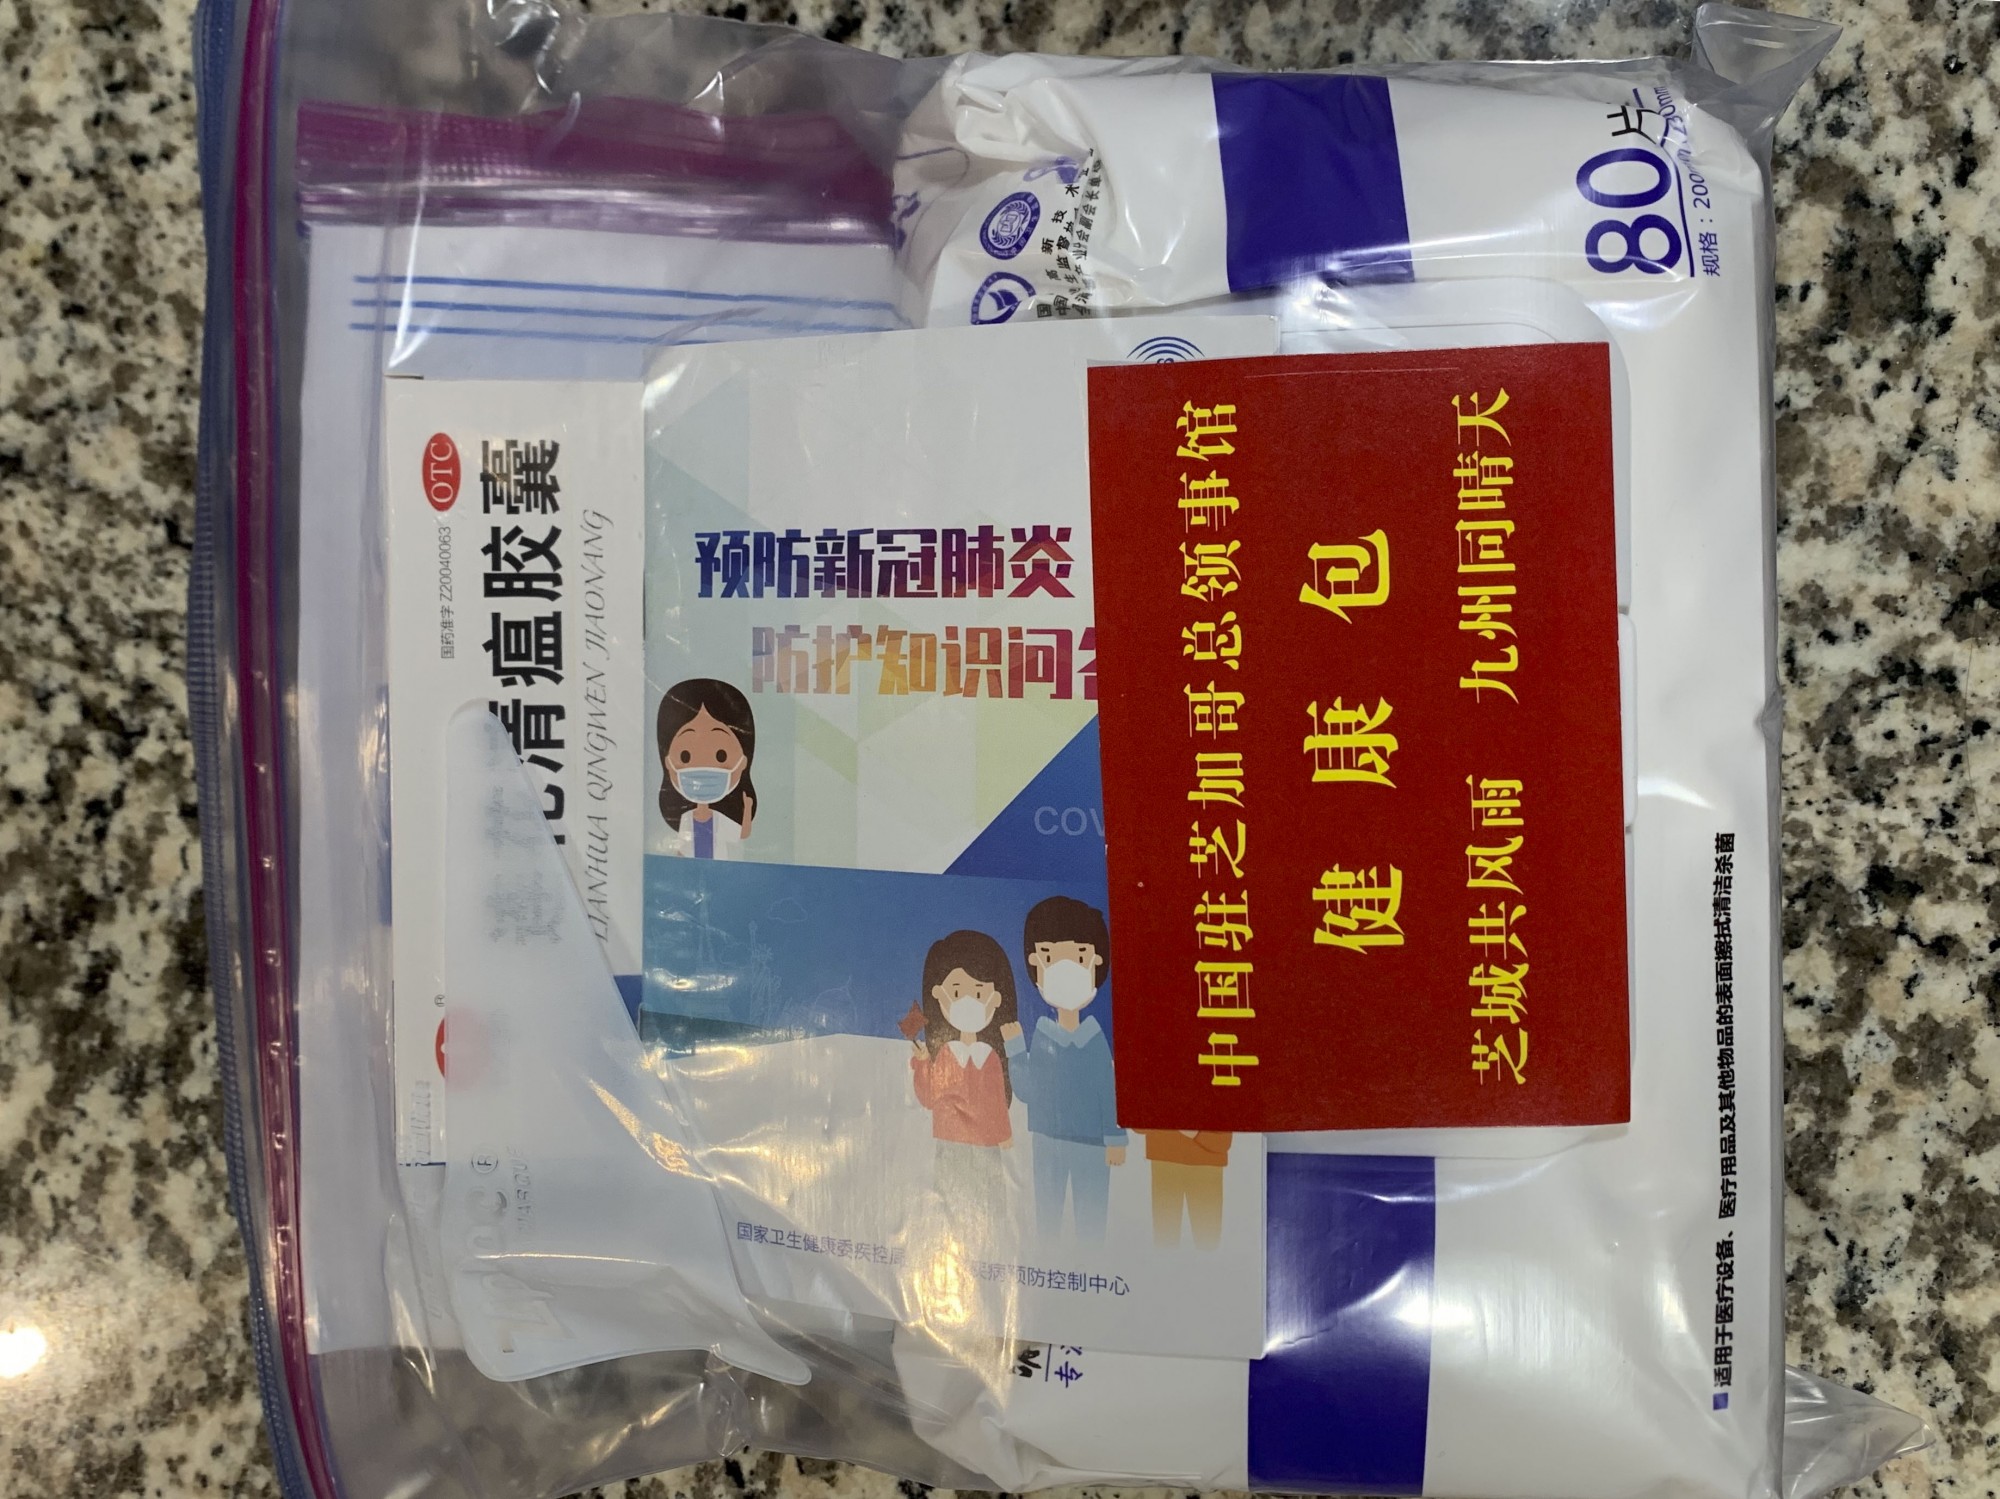 A health package sent to Chinese international students, including those at the University of Minnesota, containing personal protective equipment  to aid them during the COVID-19 pandemic. Courtesy of the Chinese Student Scholars Association.